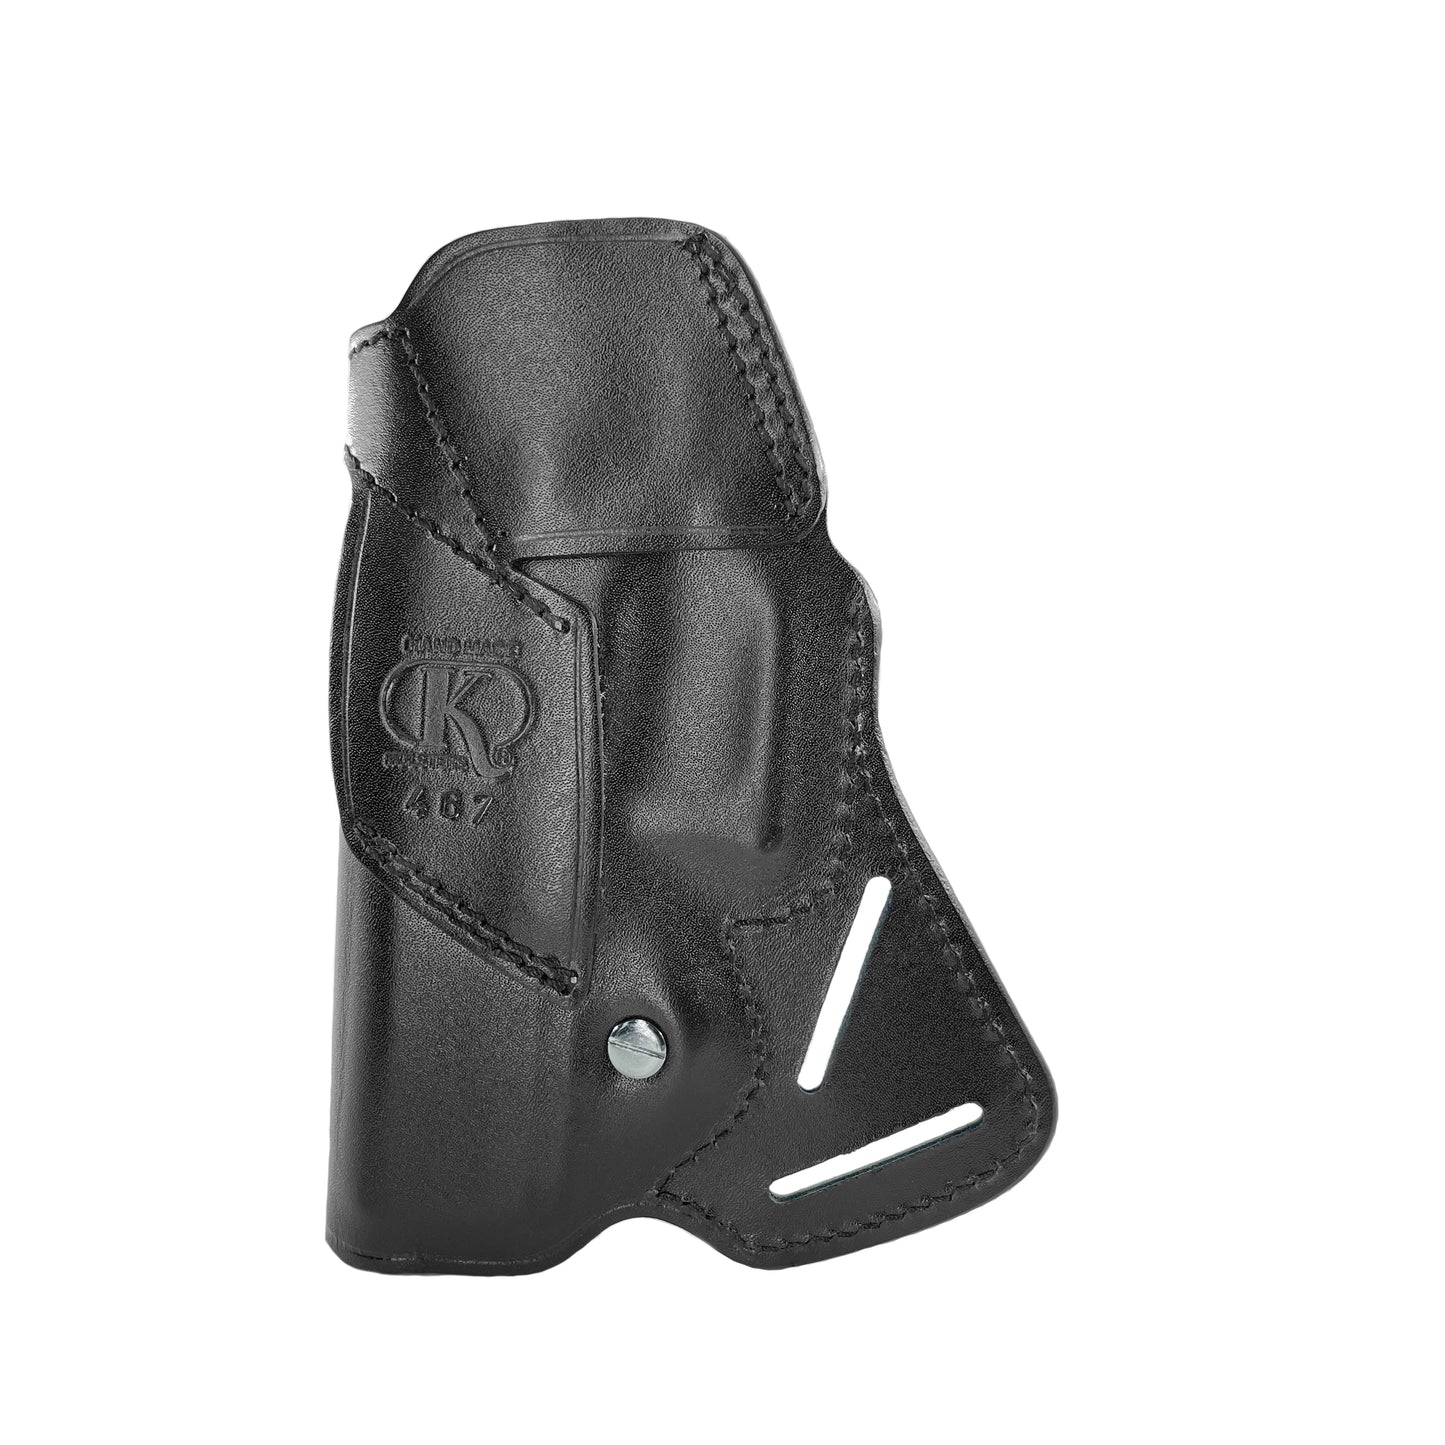 ALIS711 Small of Back Leather Holster Fits Colt 1911 RH Handmade!